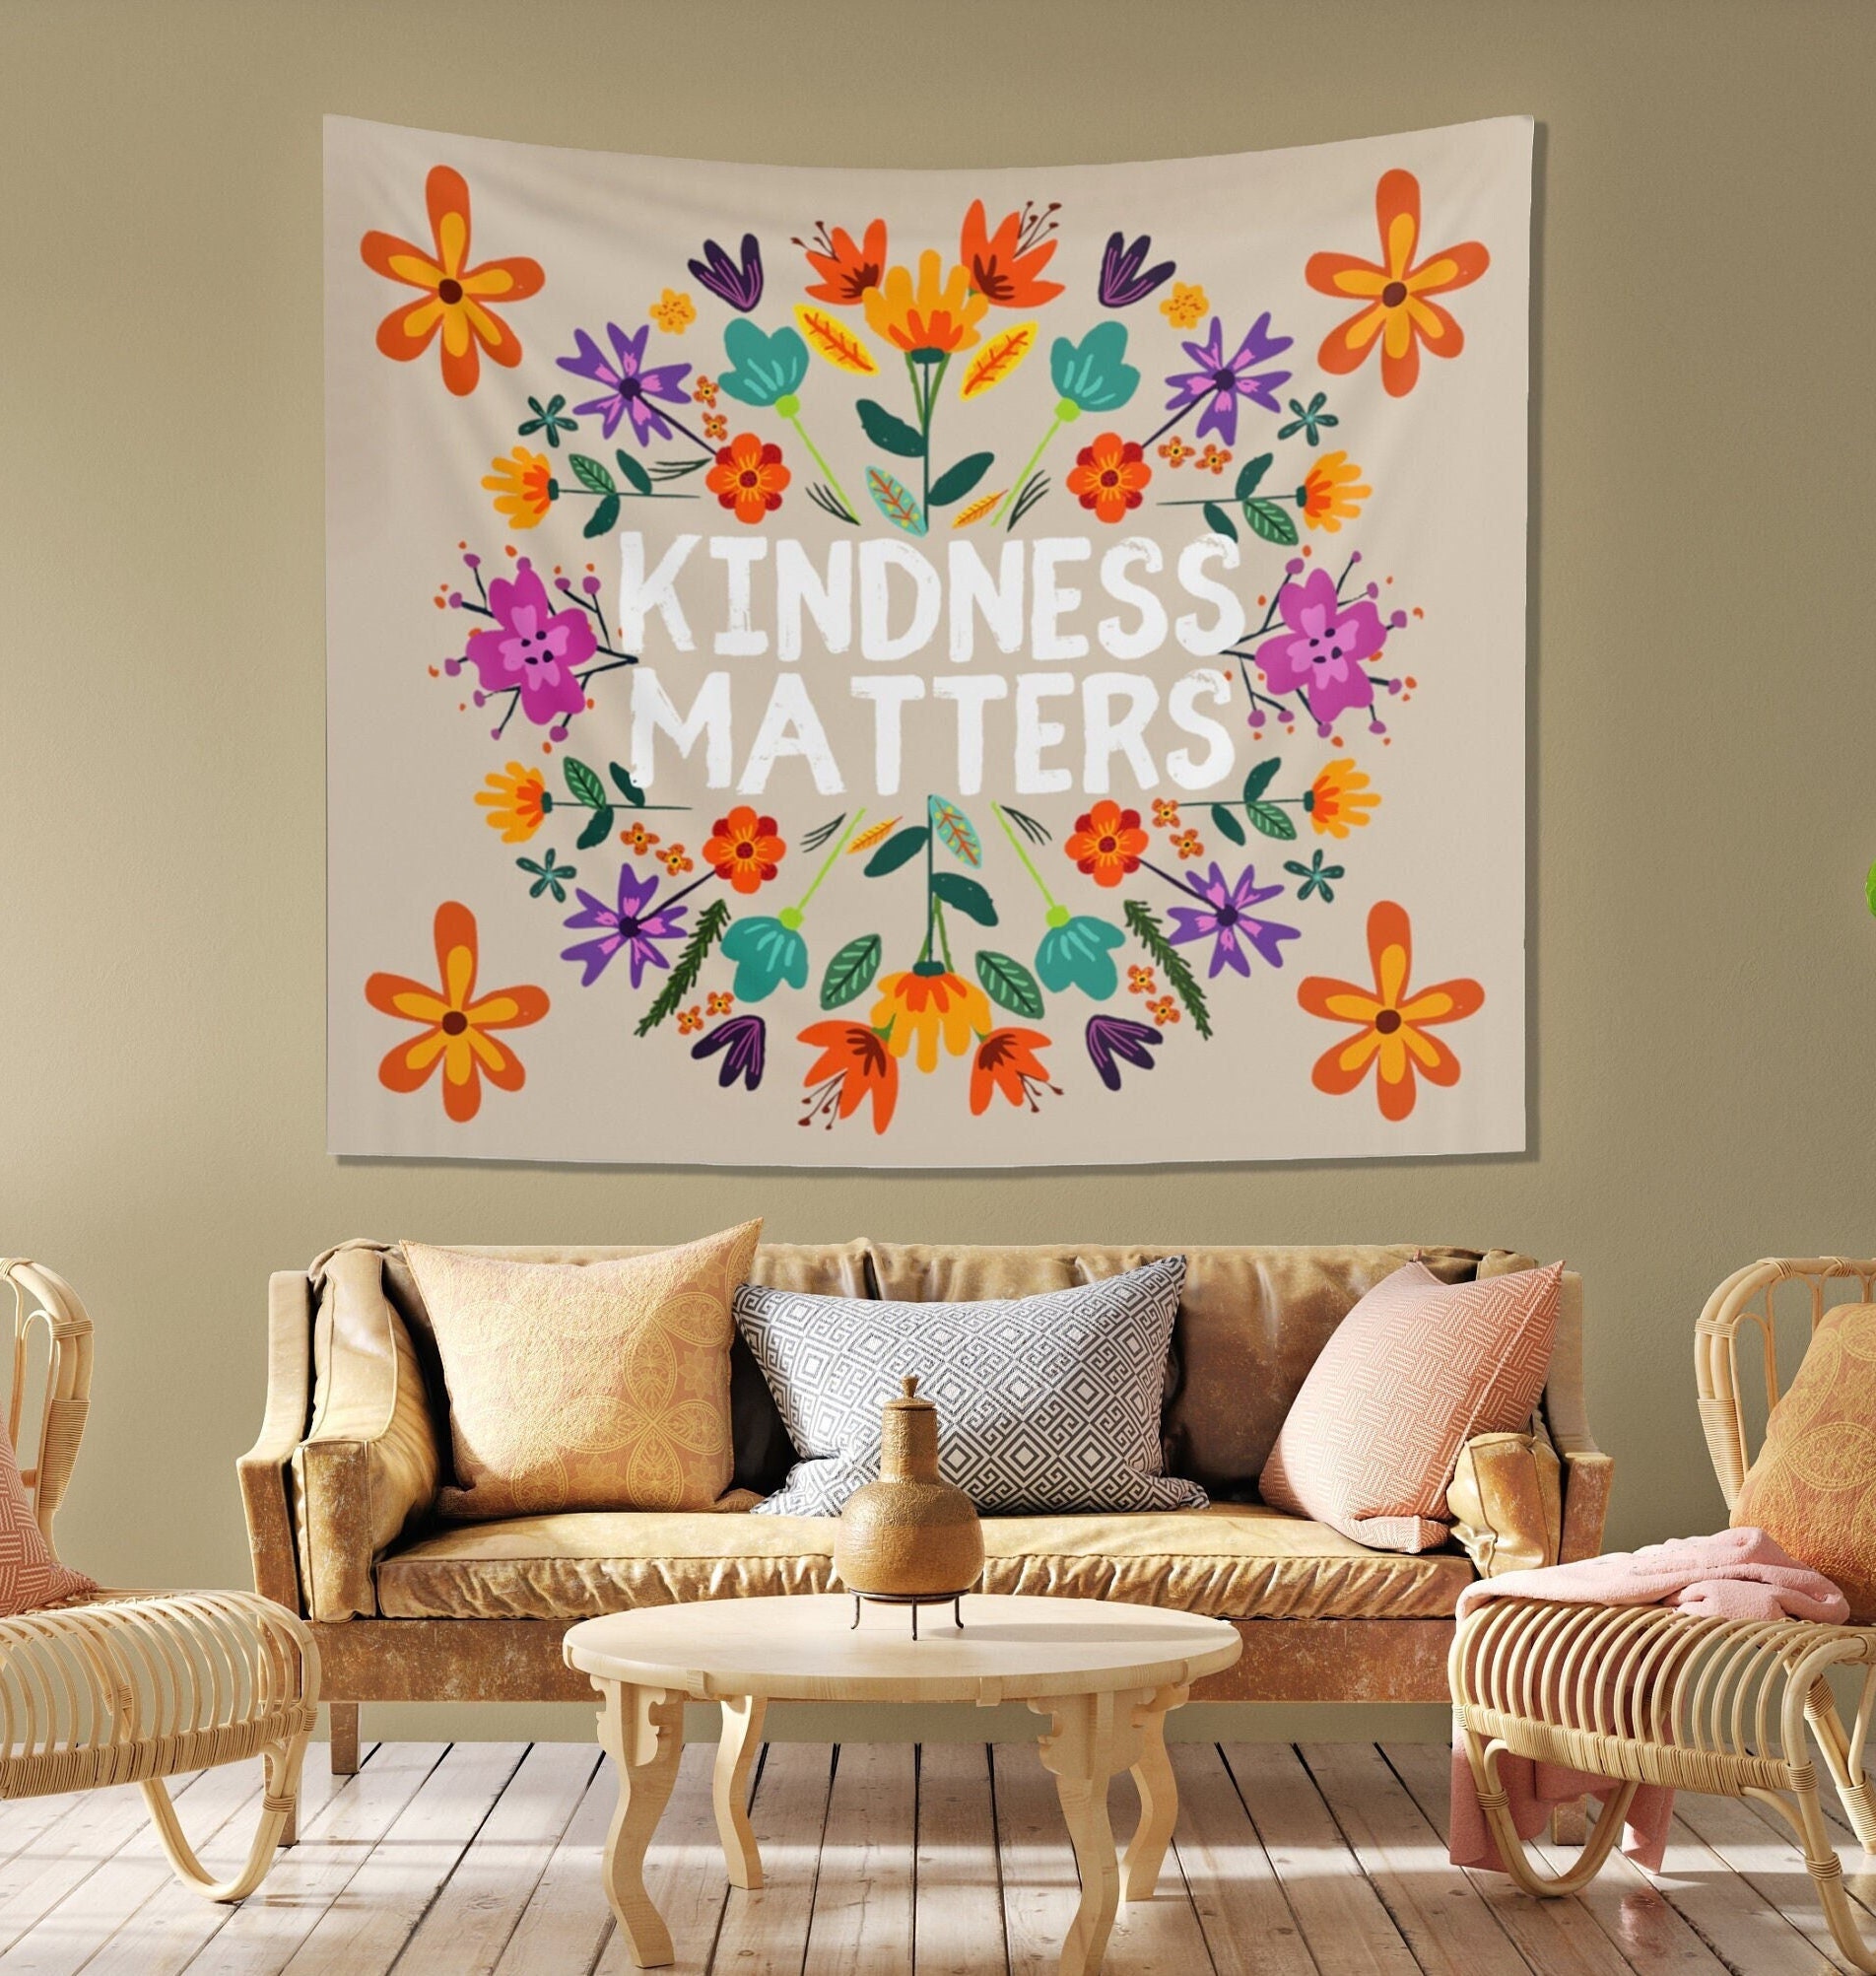  HGOD DESIGNS Flower Tapestry Wall Hanging Colorful